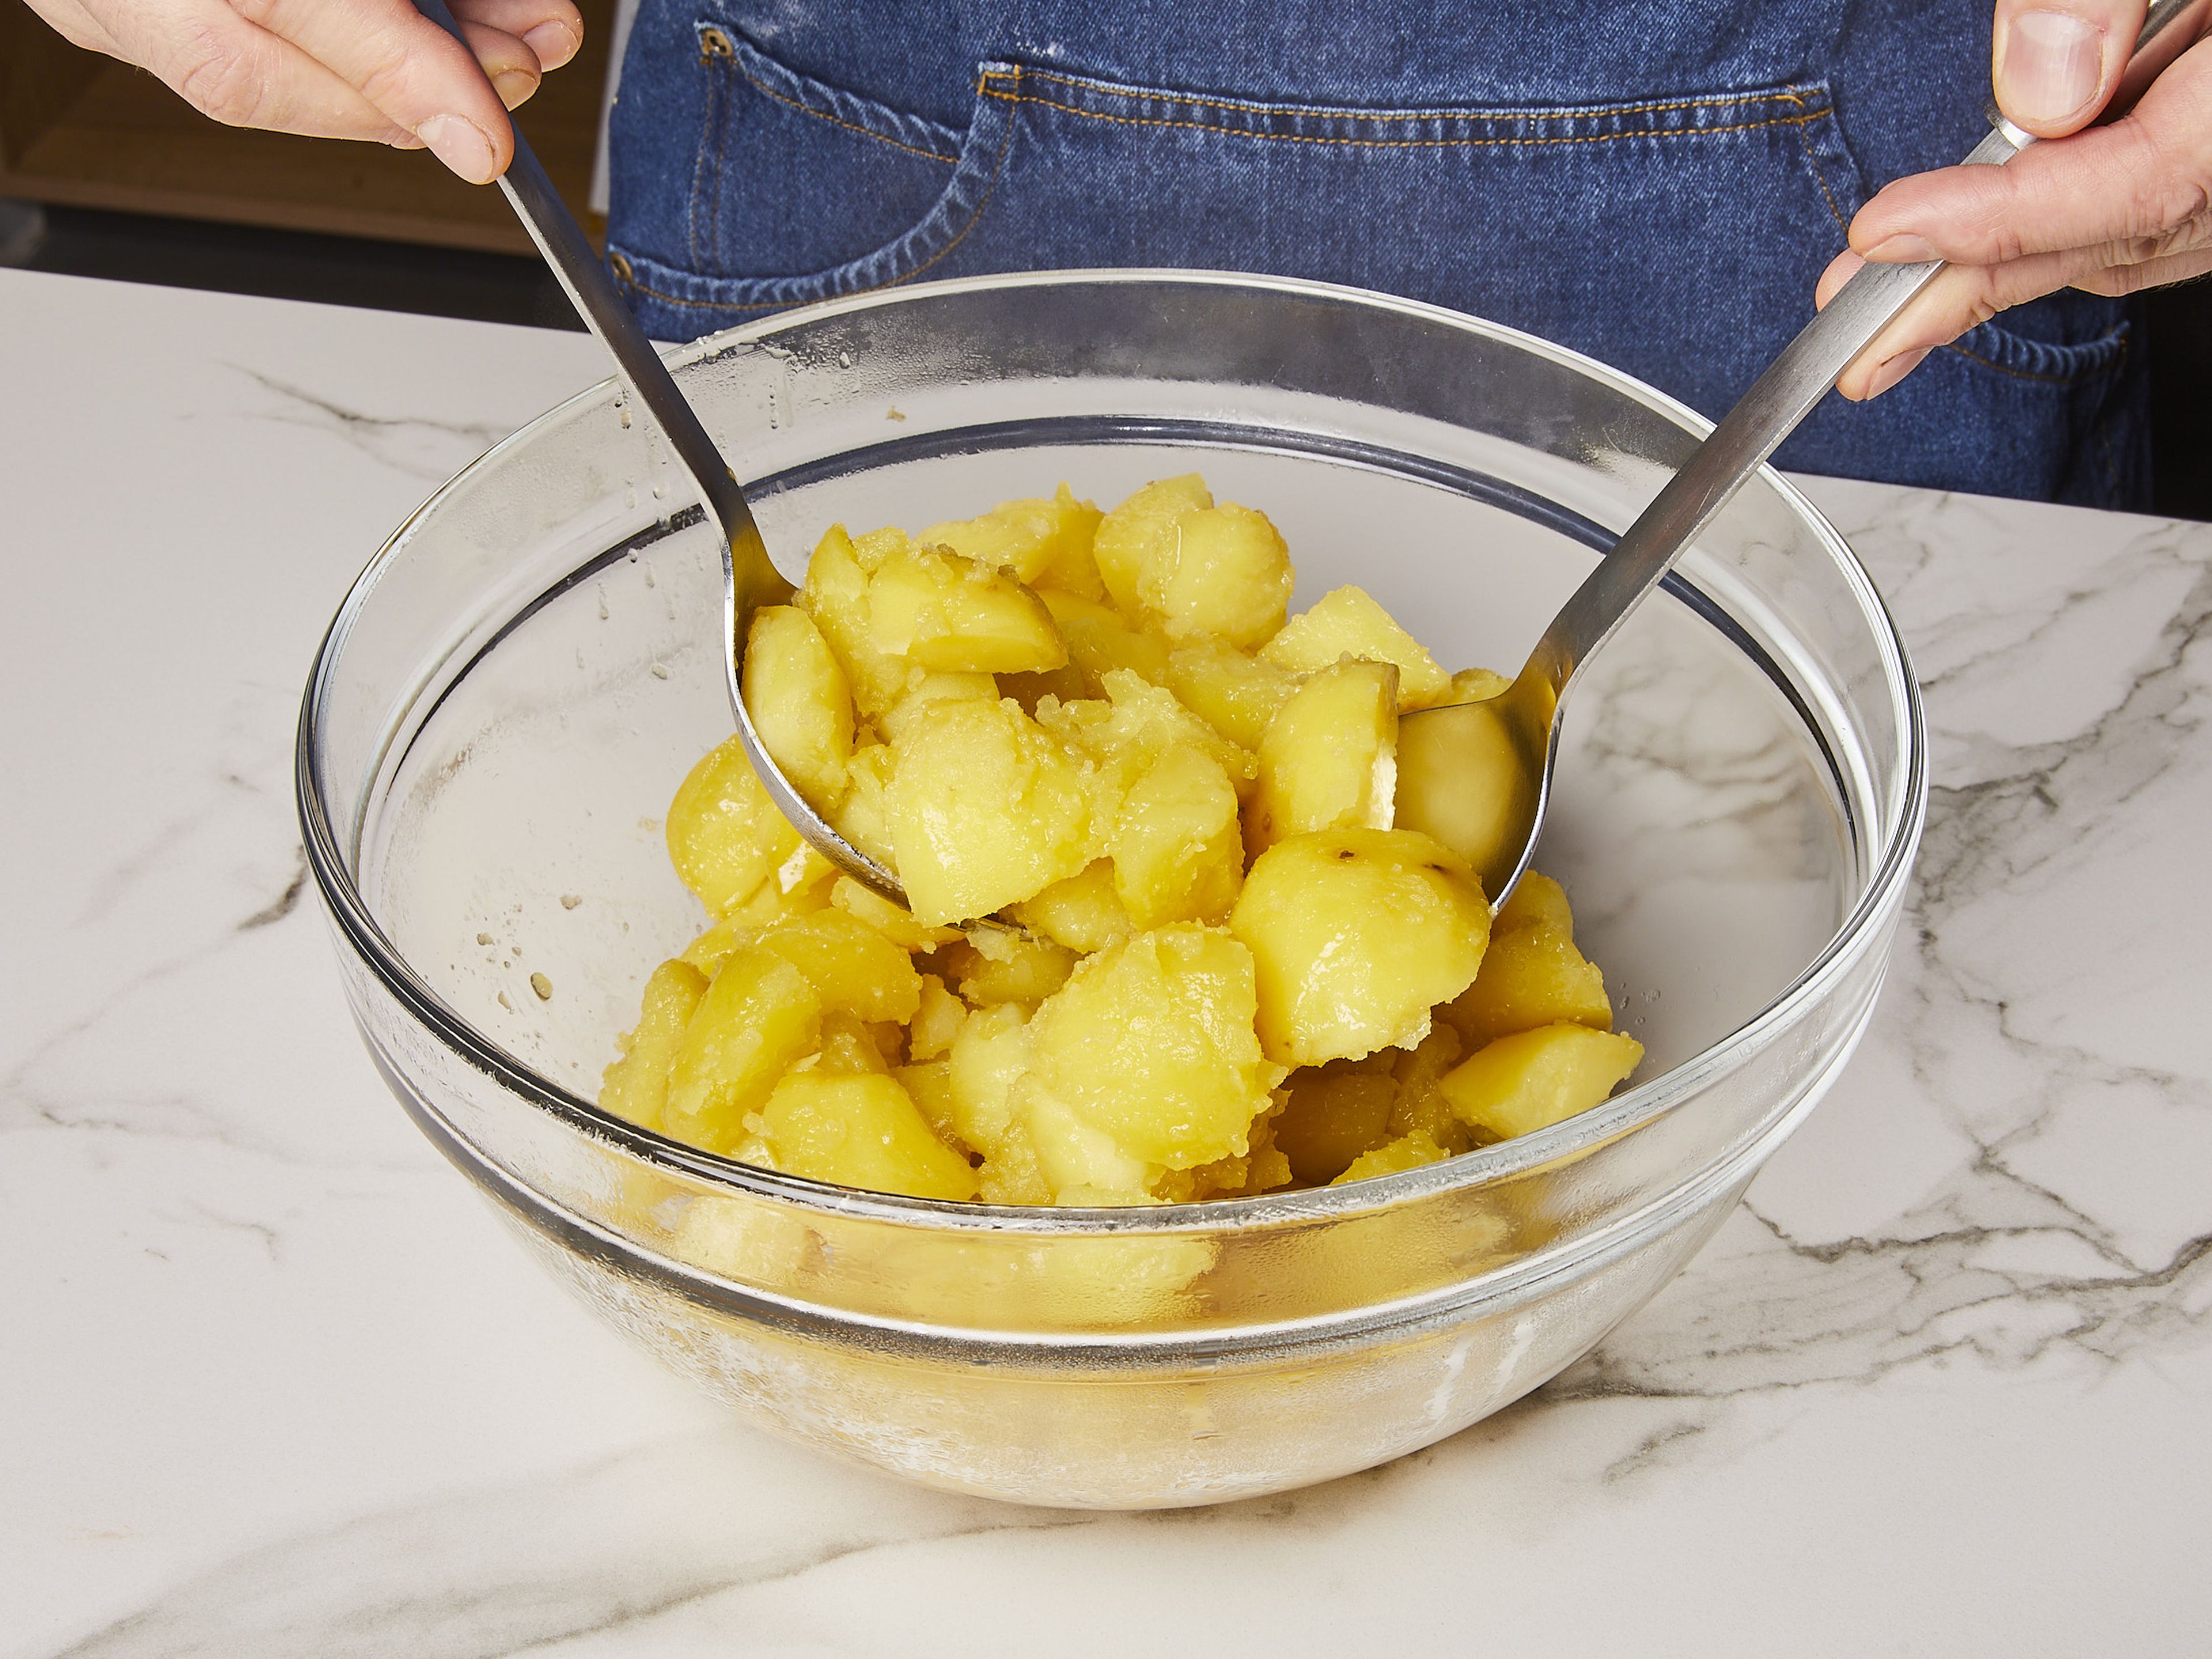 Once the potatoes are cooked, drain them in a sieve and let them rest in the pot for approx. 30 secs. to release the extra moisture. Transfer to a bowl and add oil, salt, and pepper to taste and toss them gently until they form a fluffy layer on the surface.